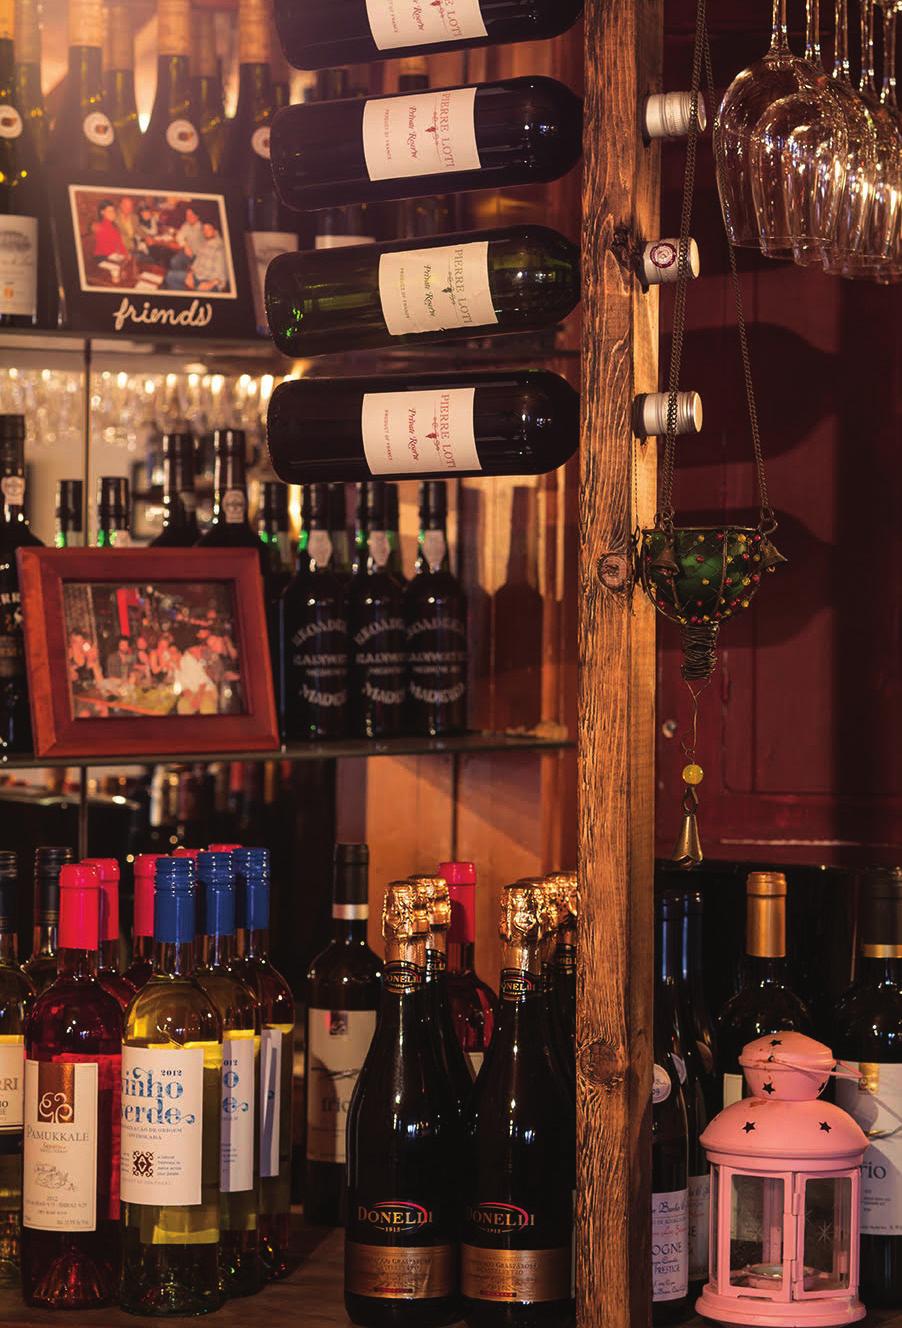 THE CHELSEA DRINKS PROJECT IS A COLLABORATION BETWEEN THE PIERRE LOTI WINE BARS AND WINE LOVERS OF NYC. PIERRE LOTI WINE BARS (www.pierrelotiwinebar.